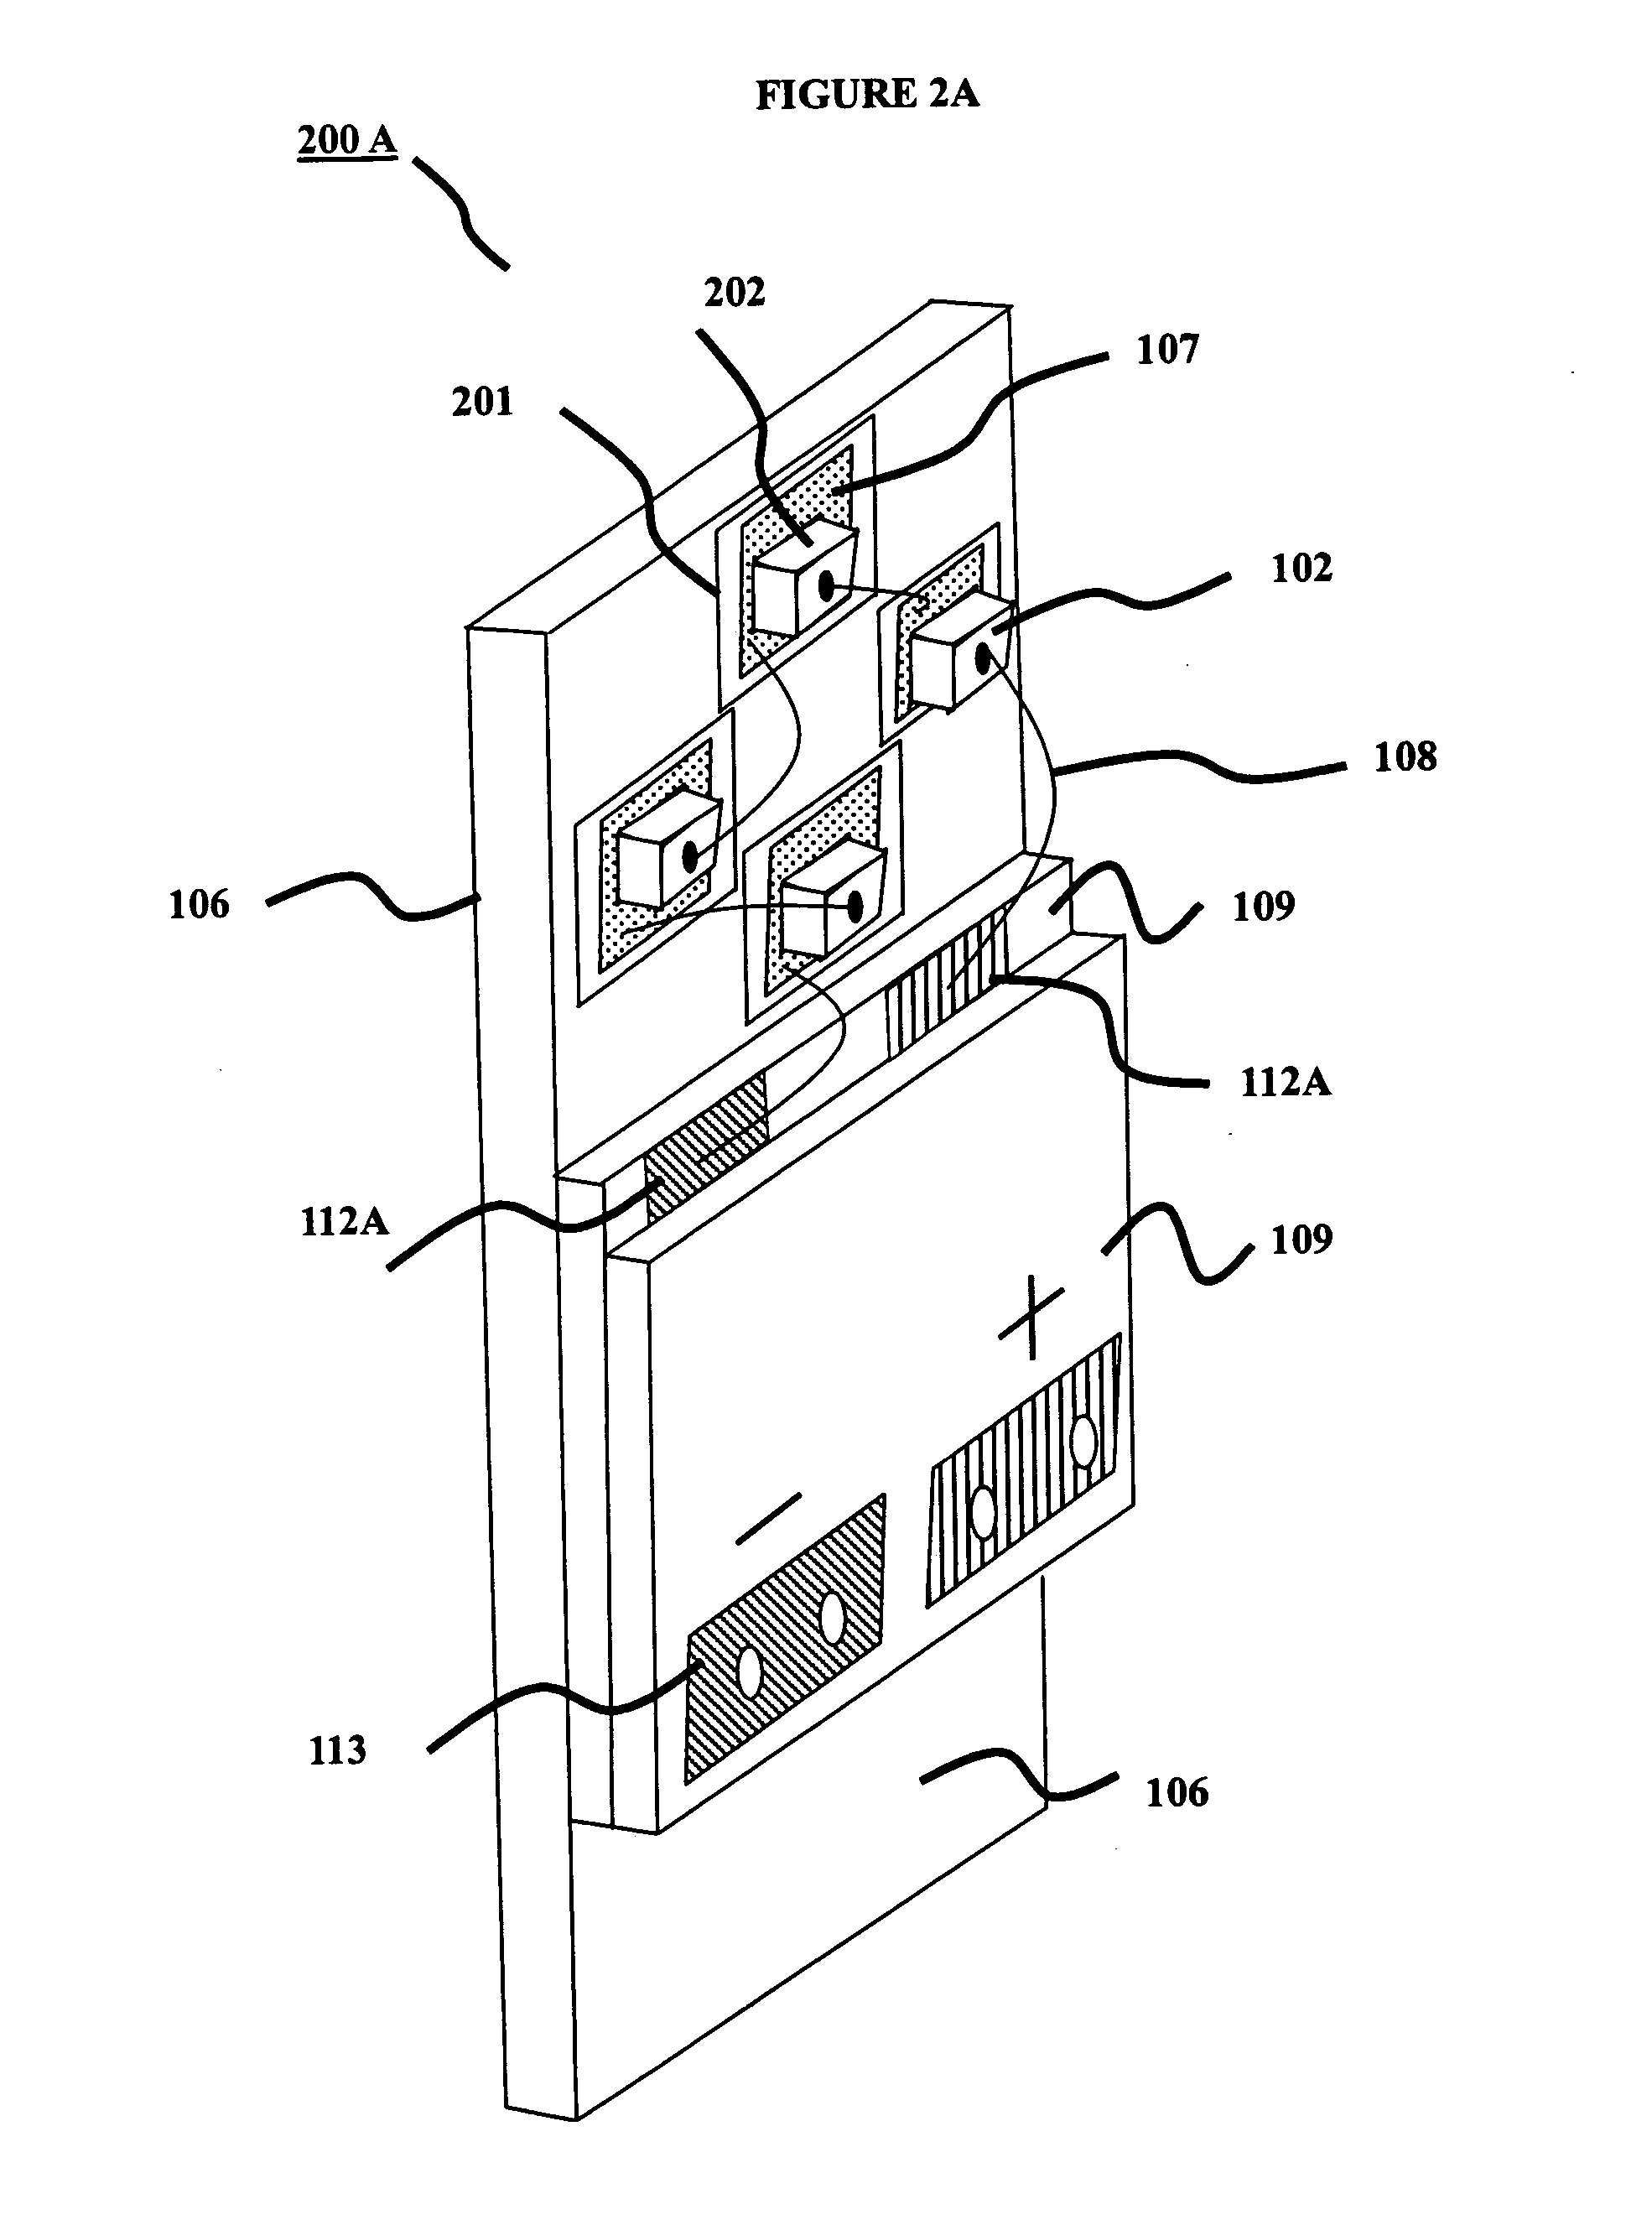 Light emitting diode package assembly that emulates the light pattern produced by an incandescent filament bulb